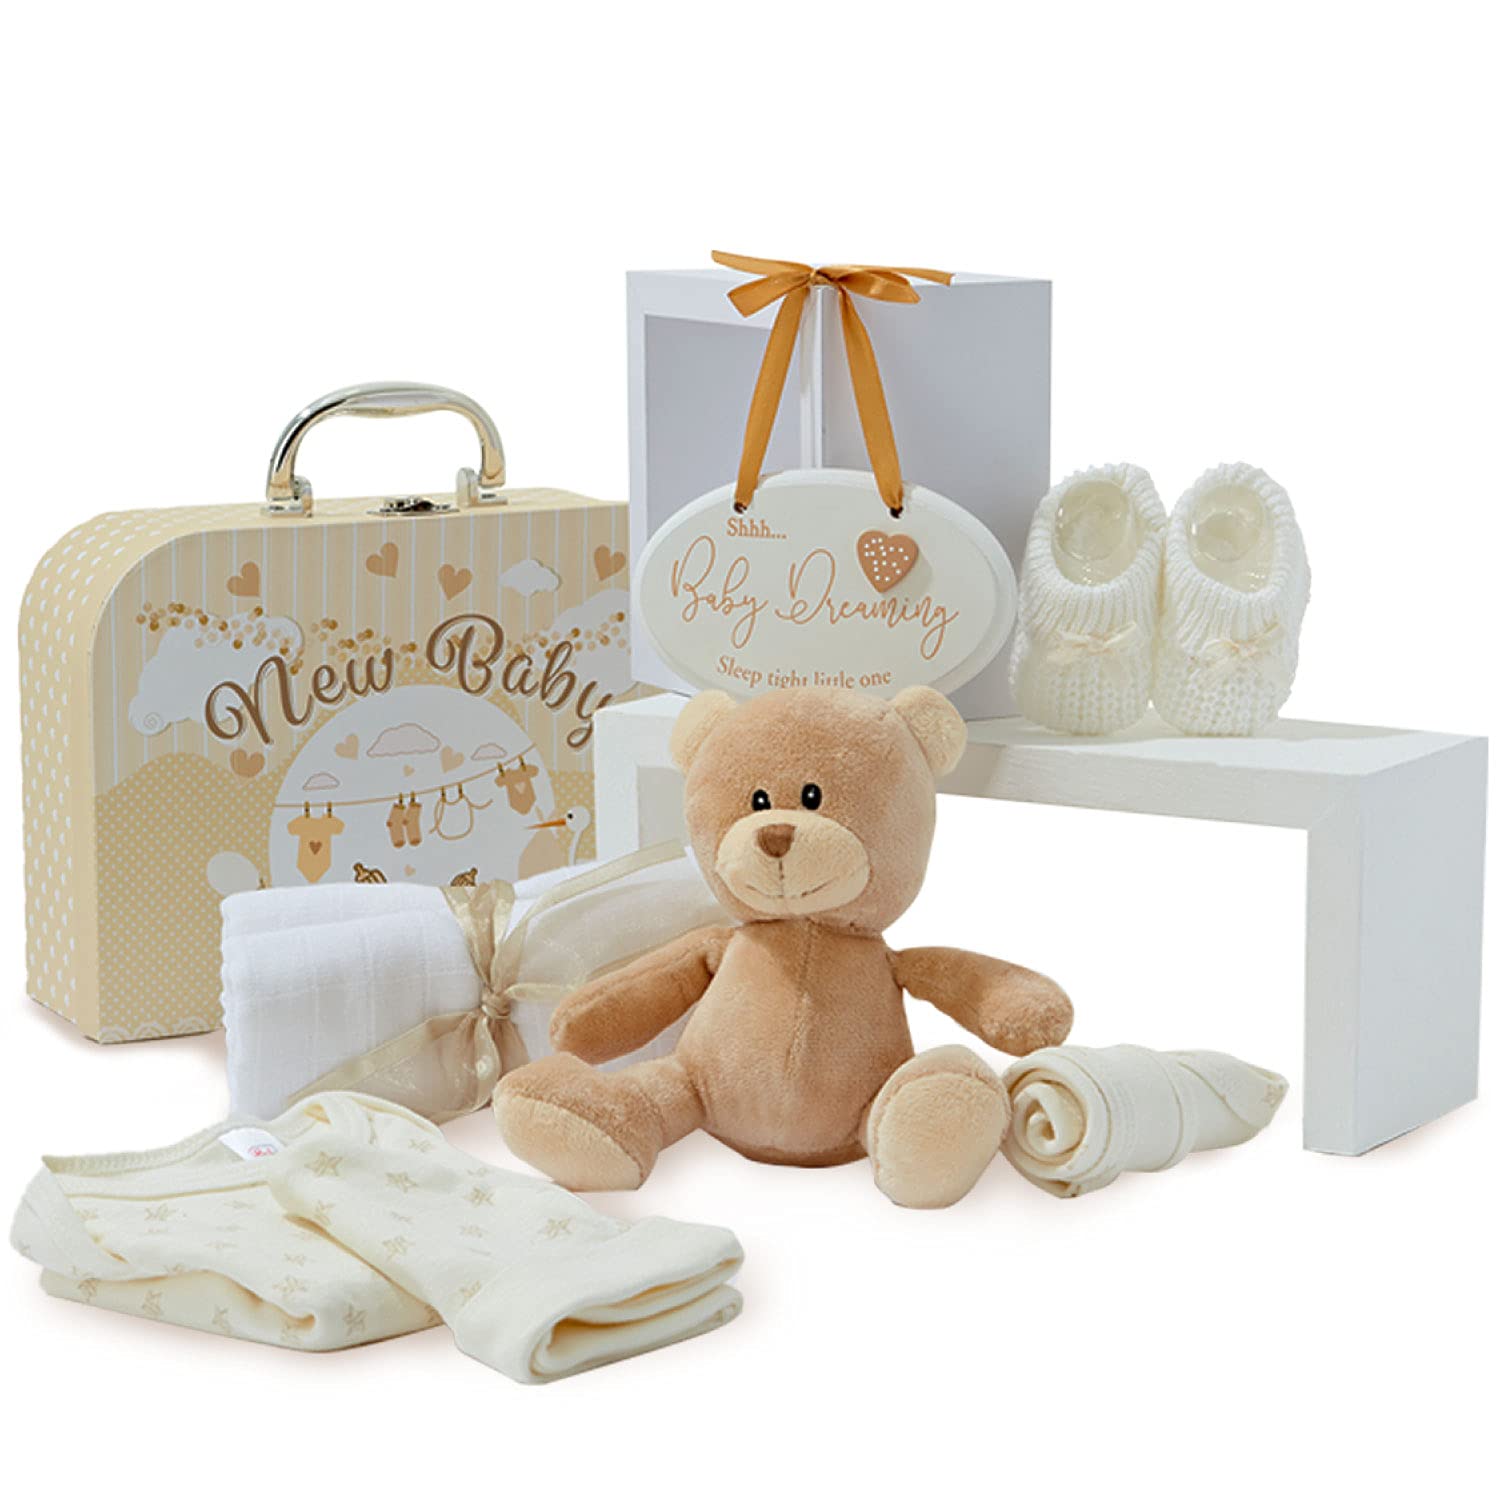 Newborn Unisex Baby Gift Set - Hand Packed Unisex Hamper Styled as a Case with Teddy Bear, Knitted Booties, Bib, Hat, Muslin Cloth and Hanging Plaque